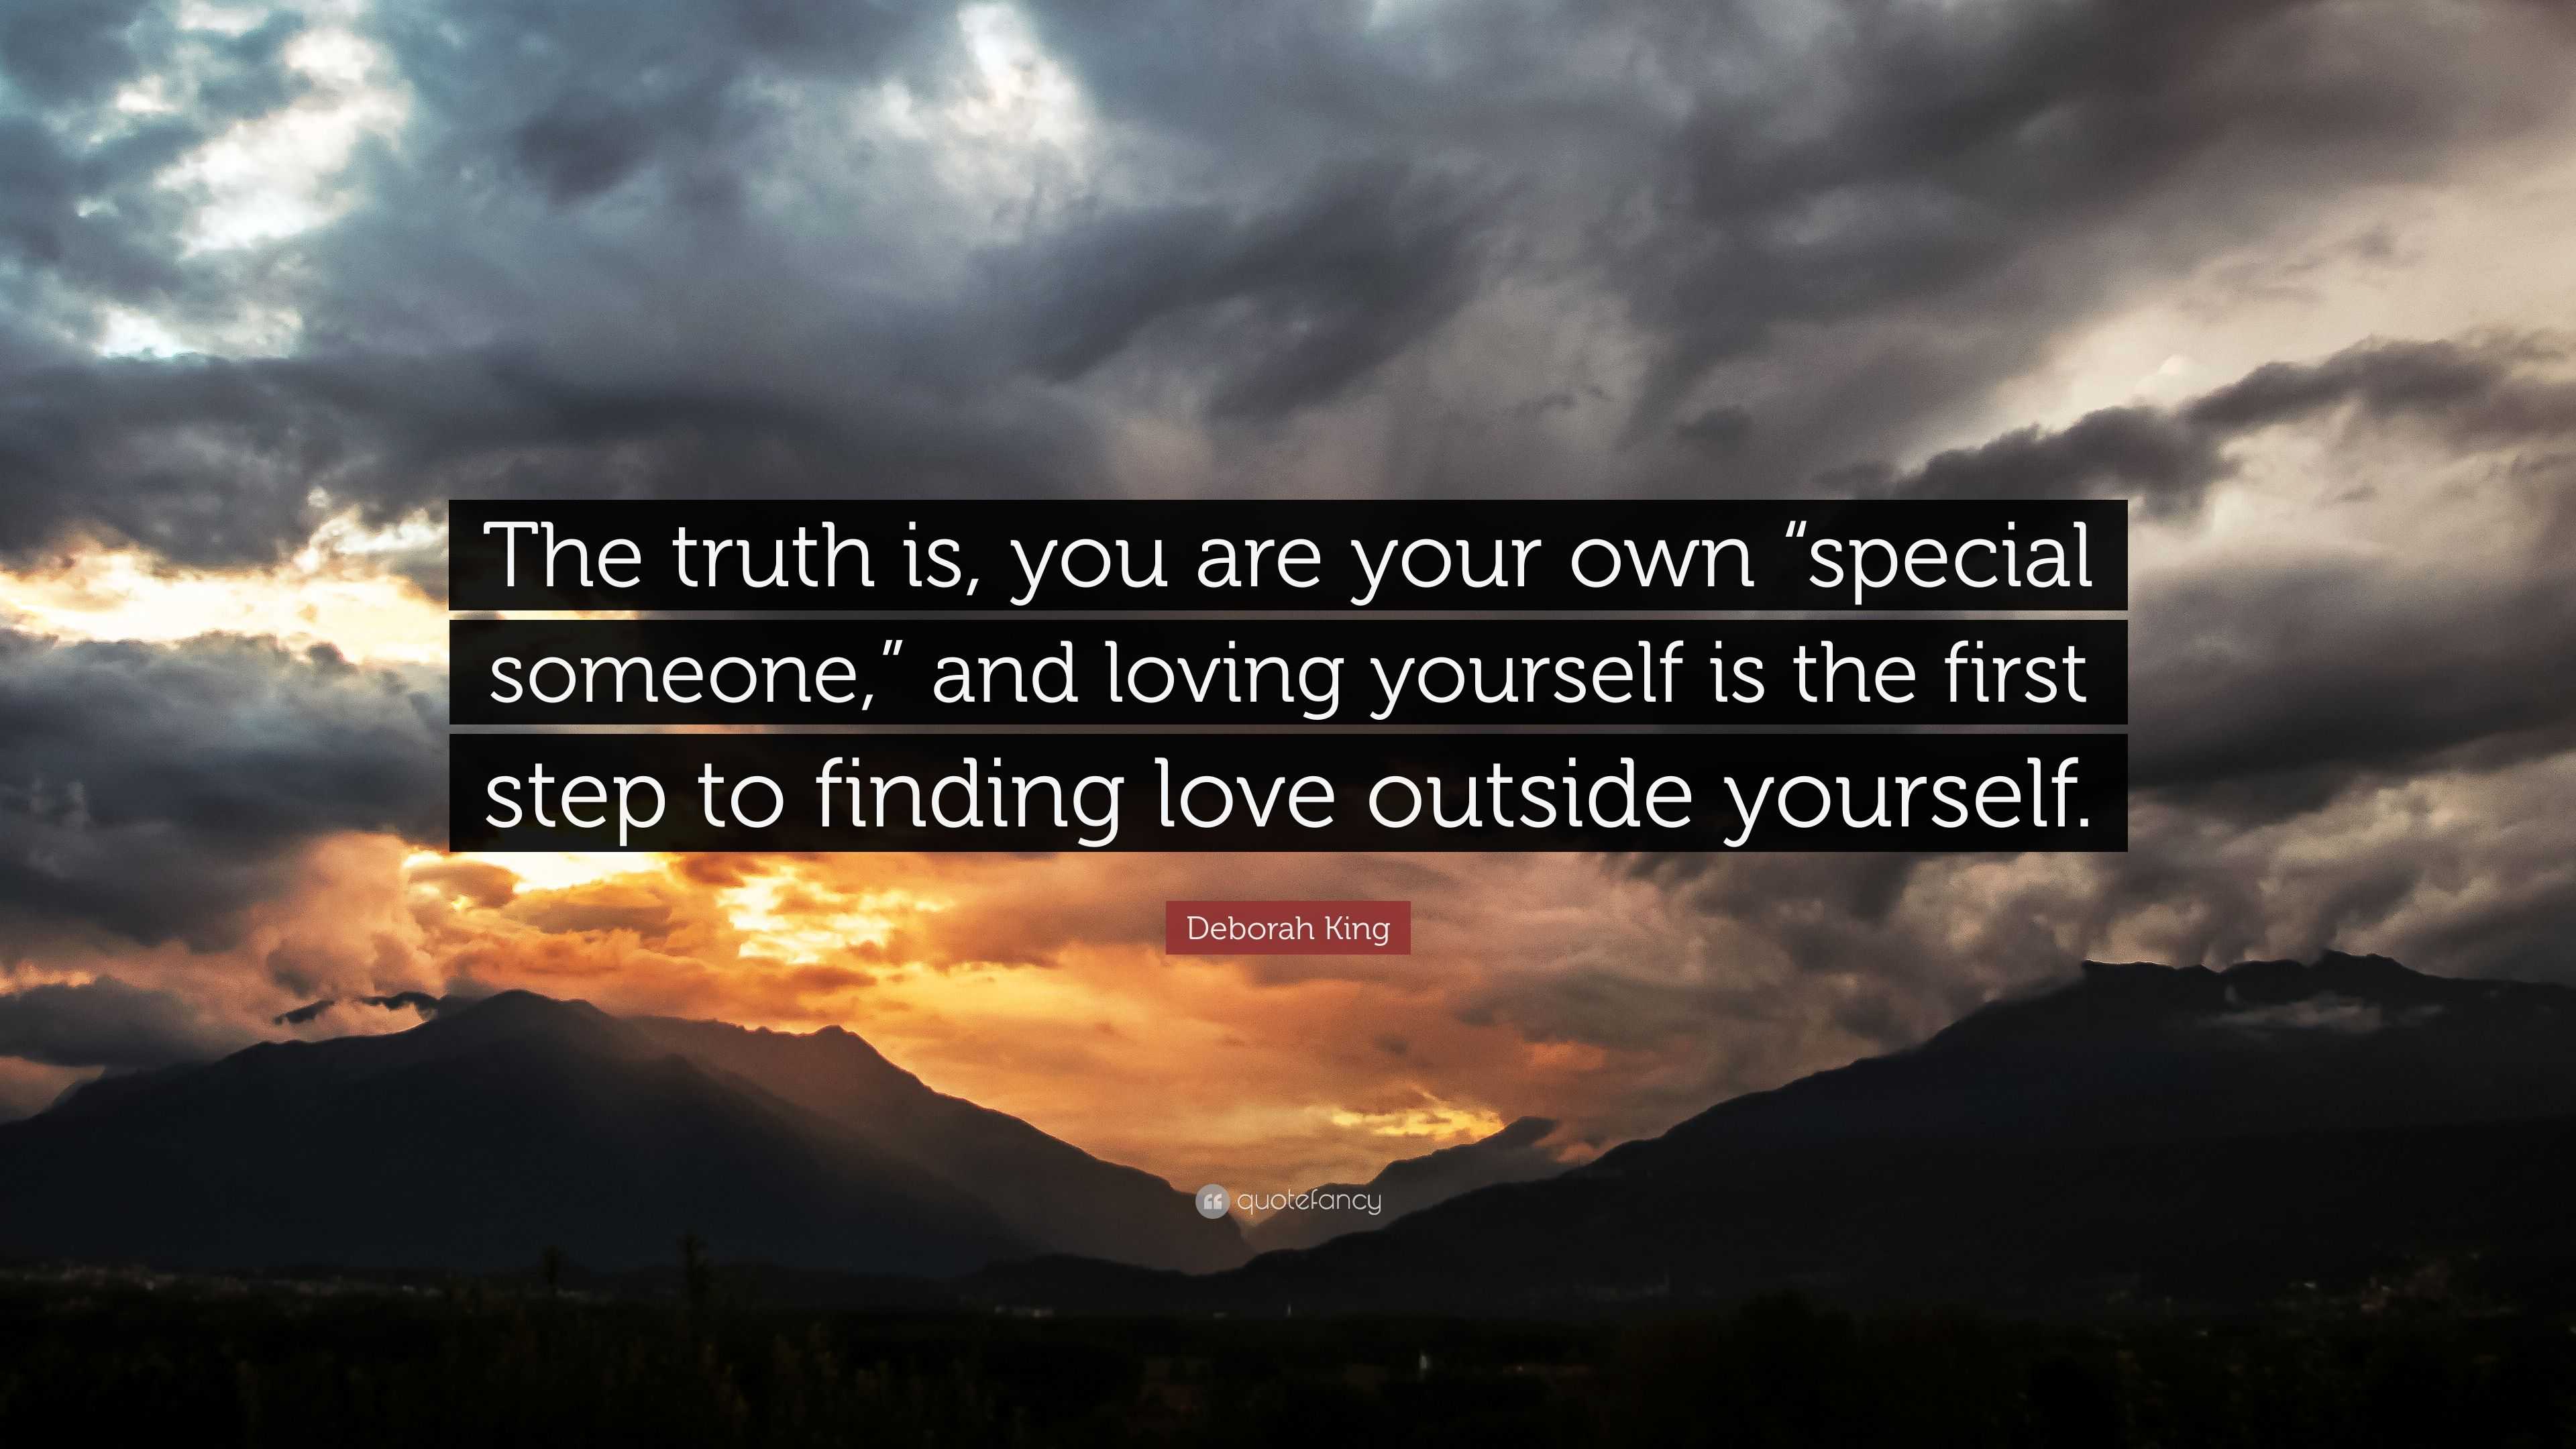 Deborah King Quote: “The truth is, you are your own “special someone ...